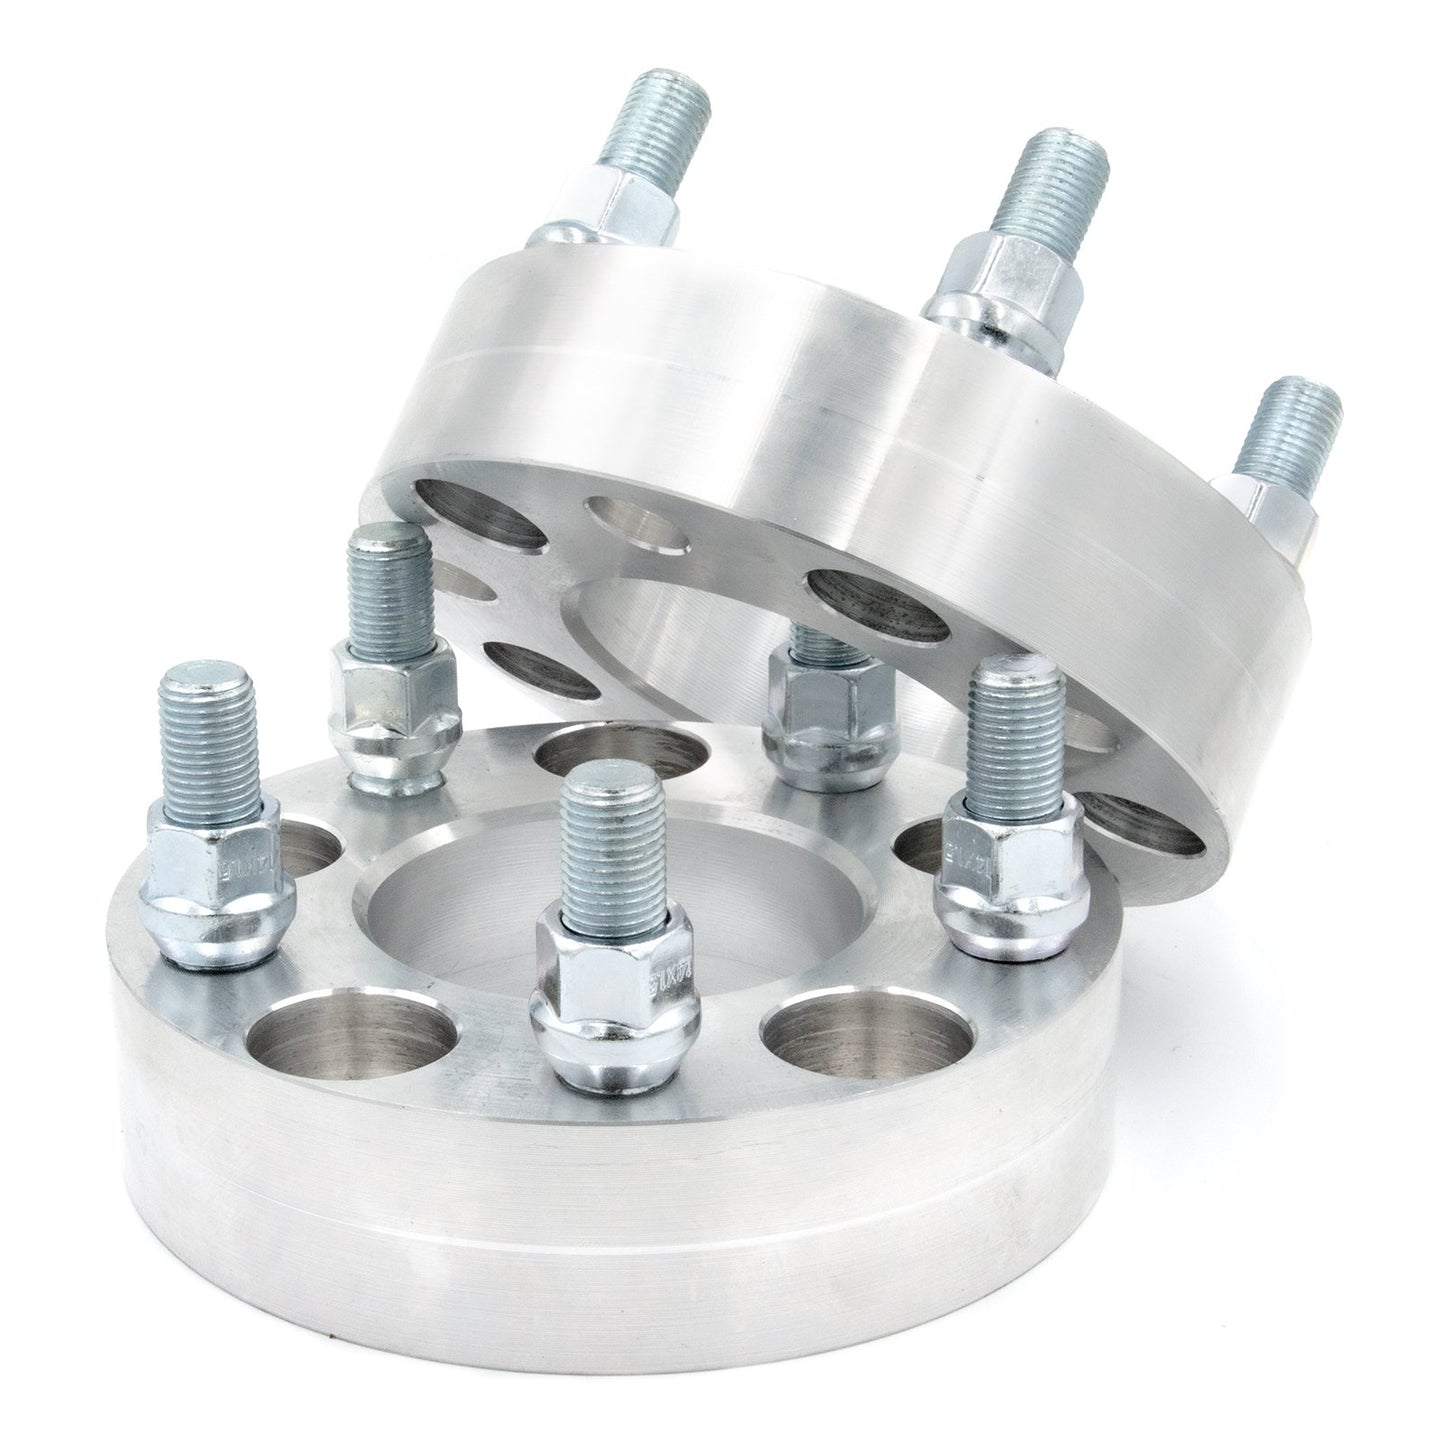 5x5" to 5x4.5" Wheel Spacer/Adapter - Thickness: 3/4"- 4"